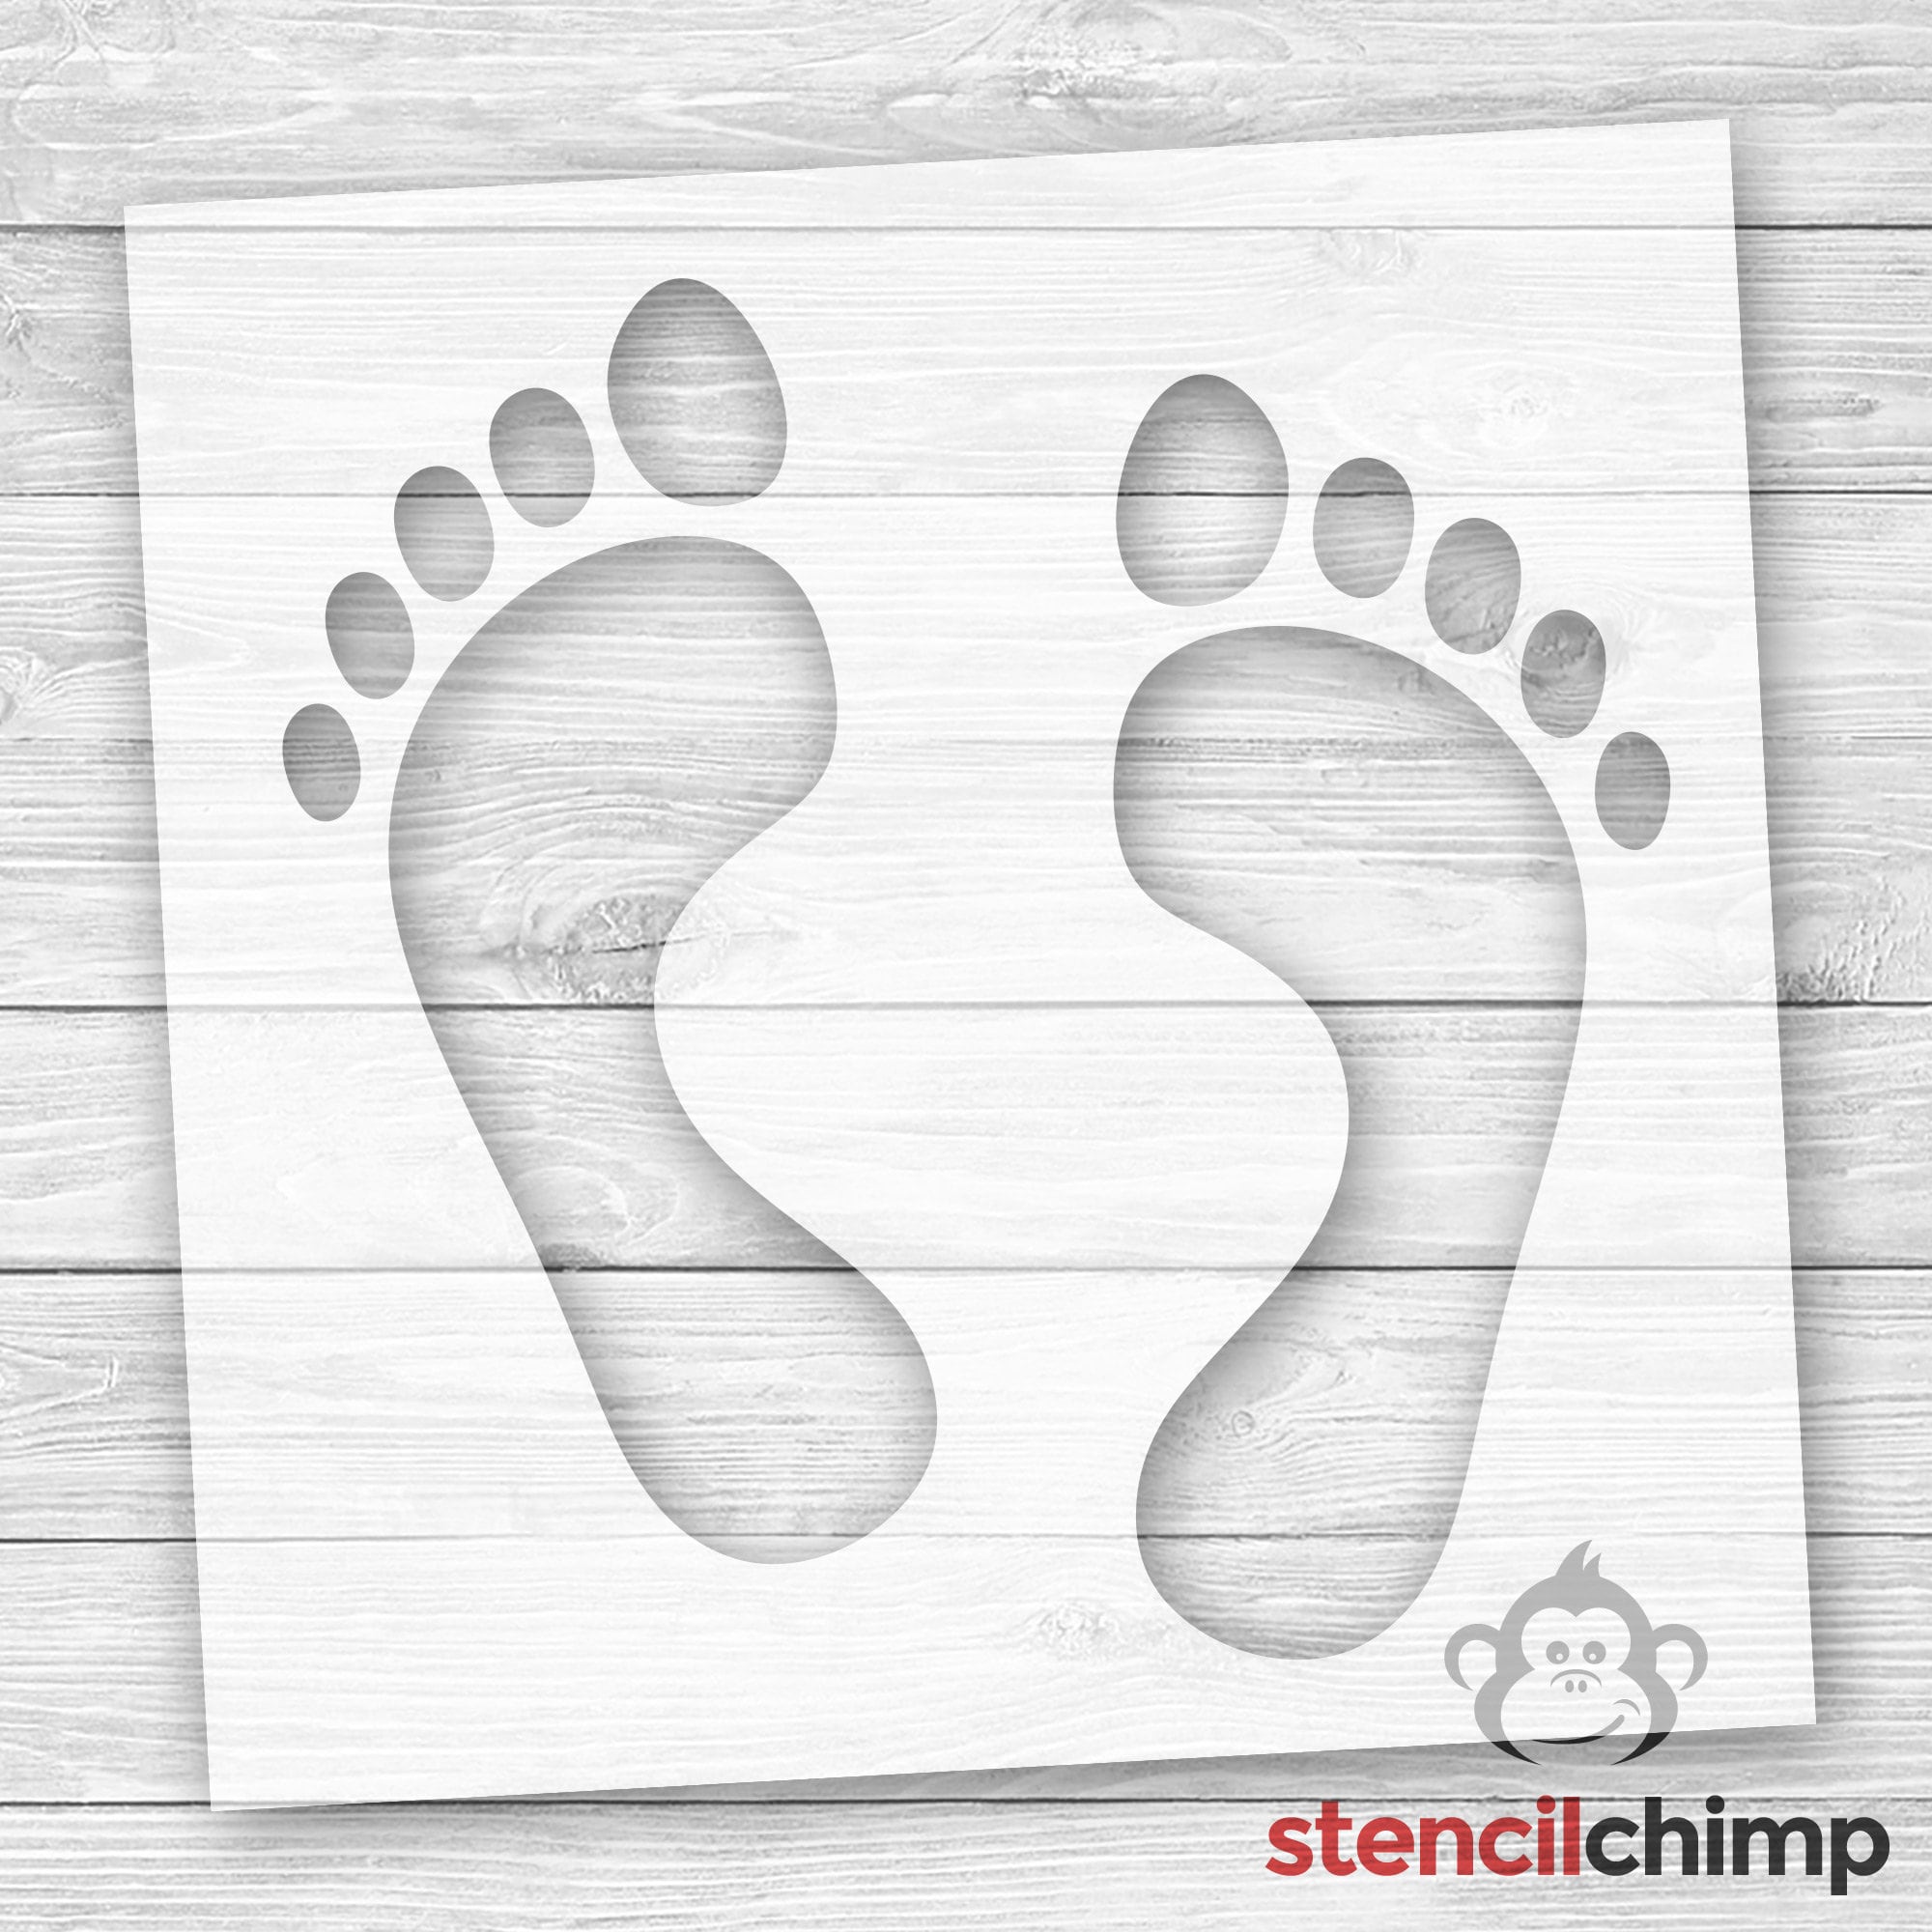 Baby Footprint Stamp Kit – Frill Seekers Gifts